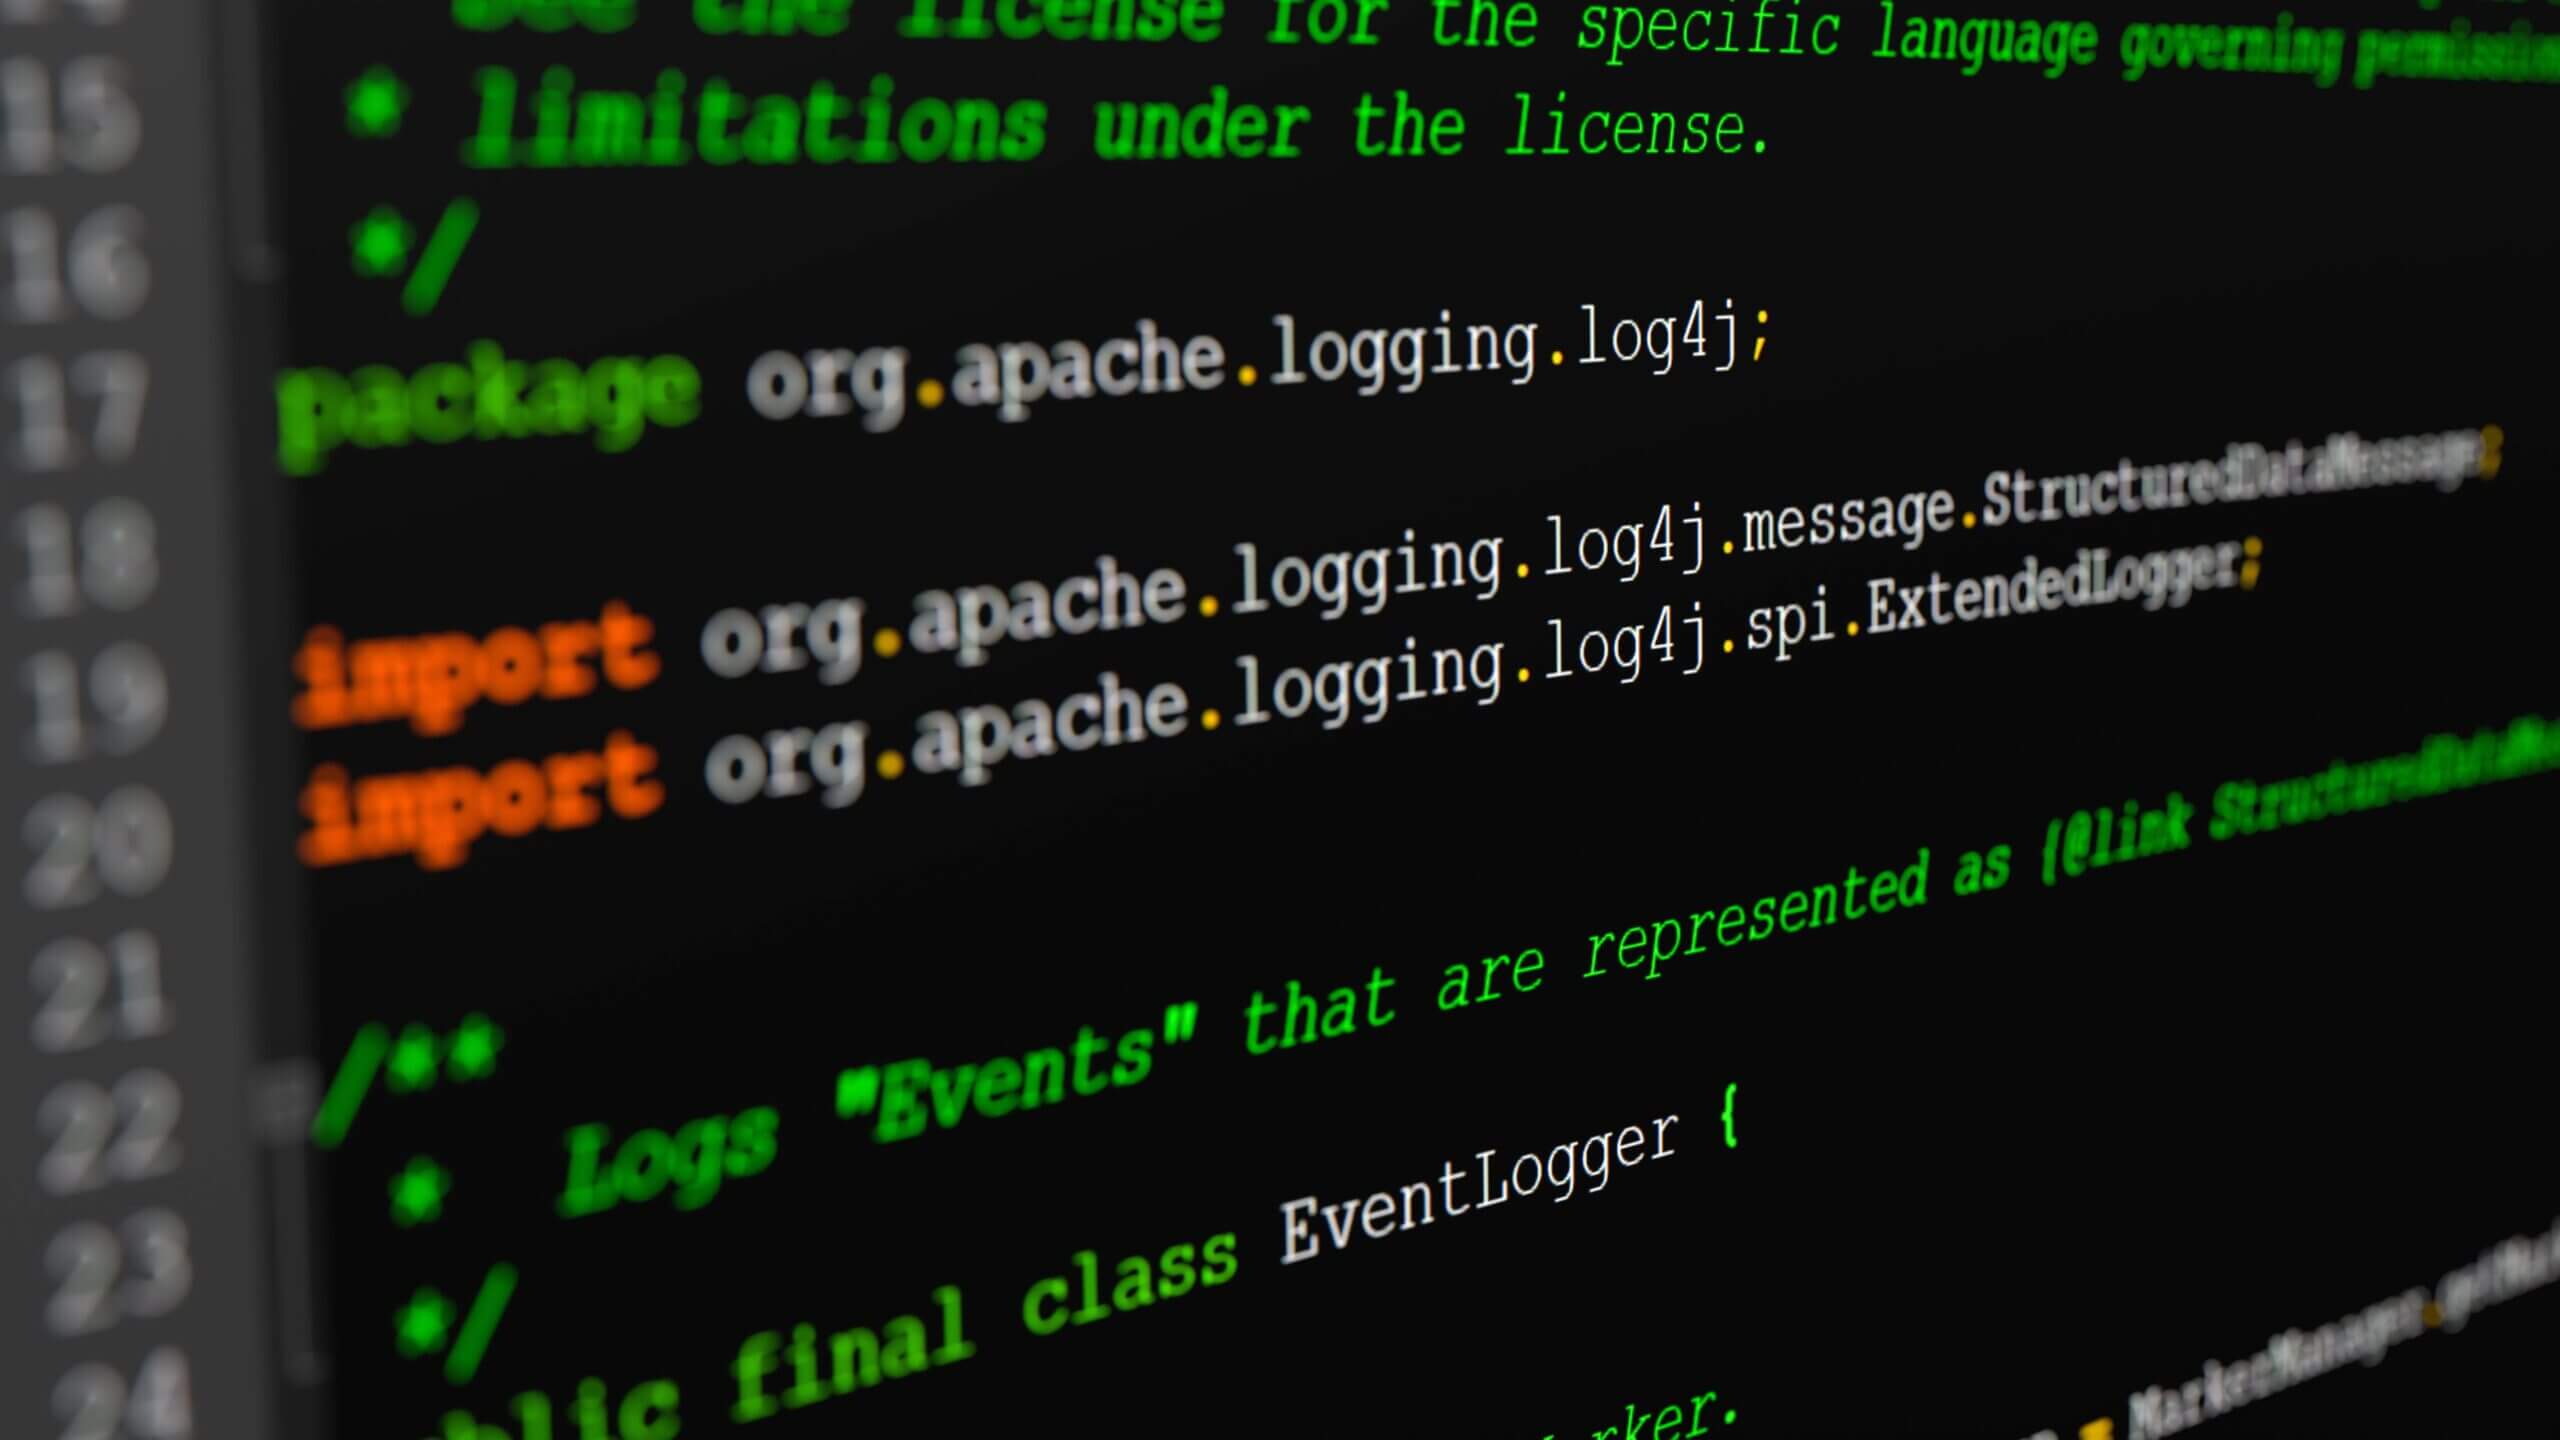 Annodata’s response to Apache Log4J Security Vulnerability